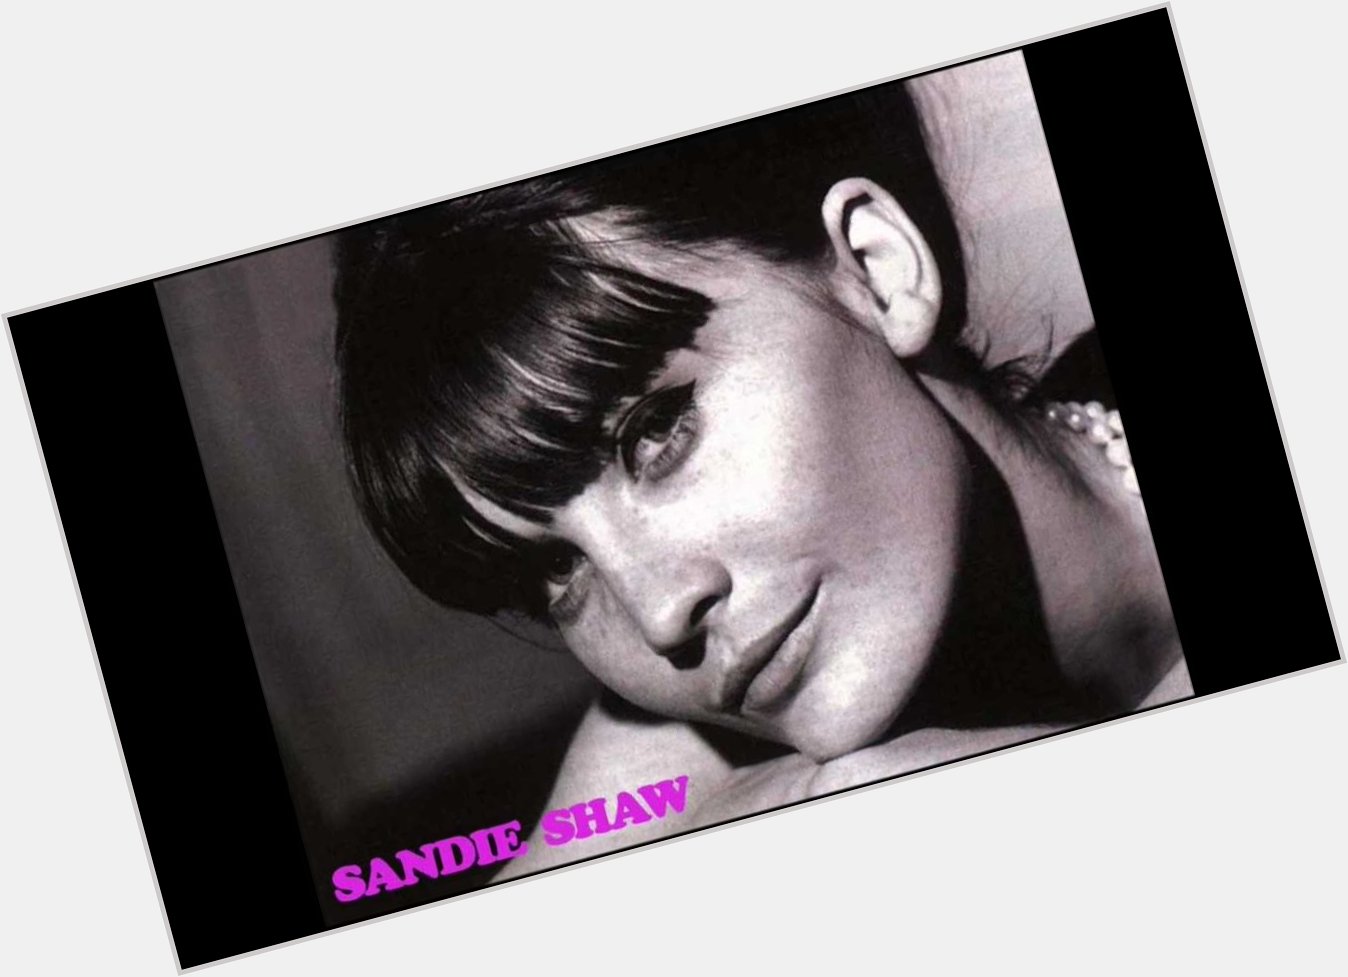 This beautiful lady is 68 years old today...Happy Birthday Sandie Shaw.  